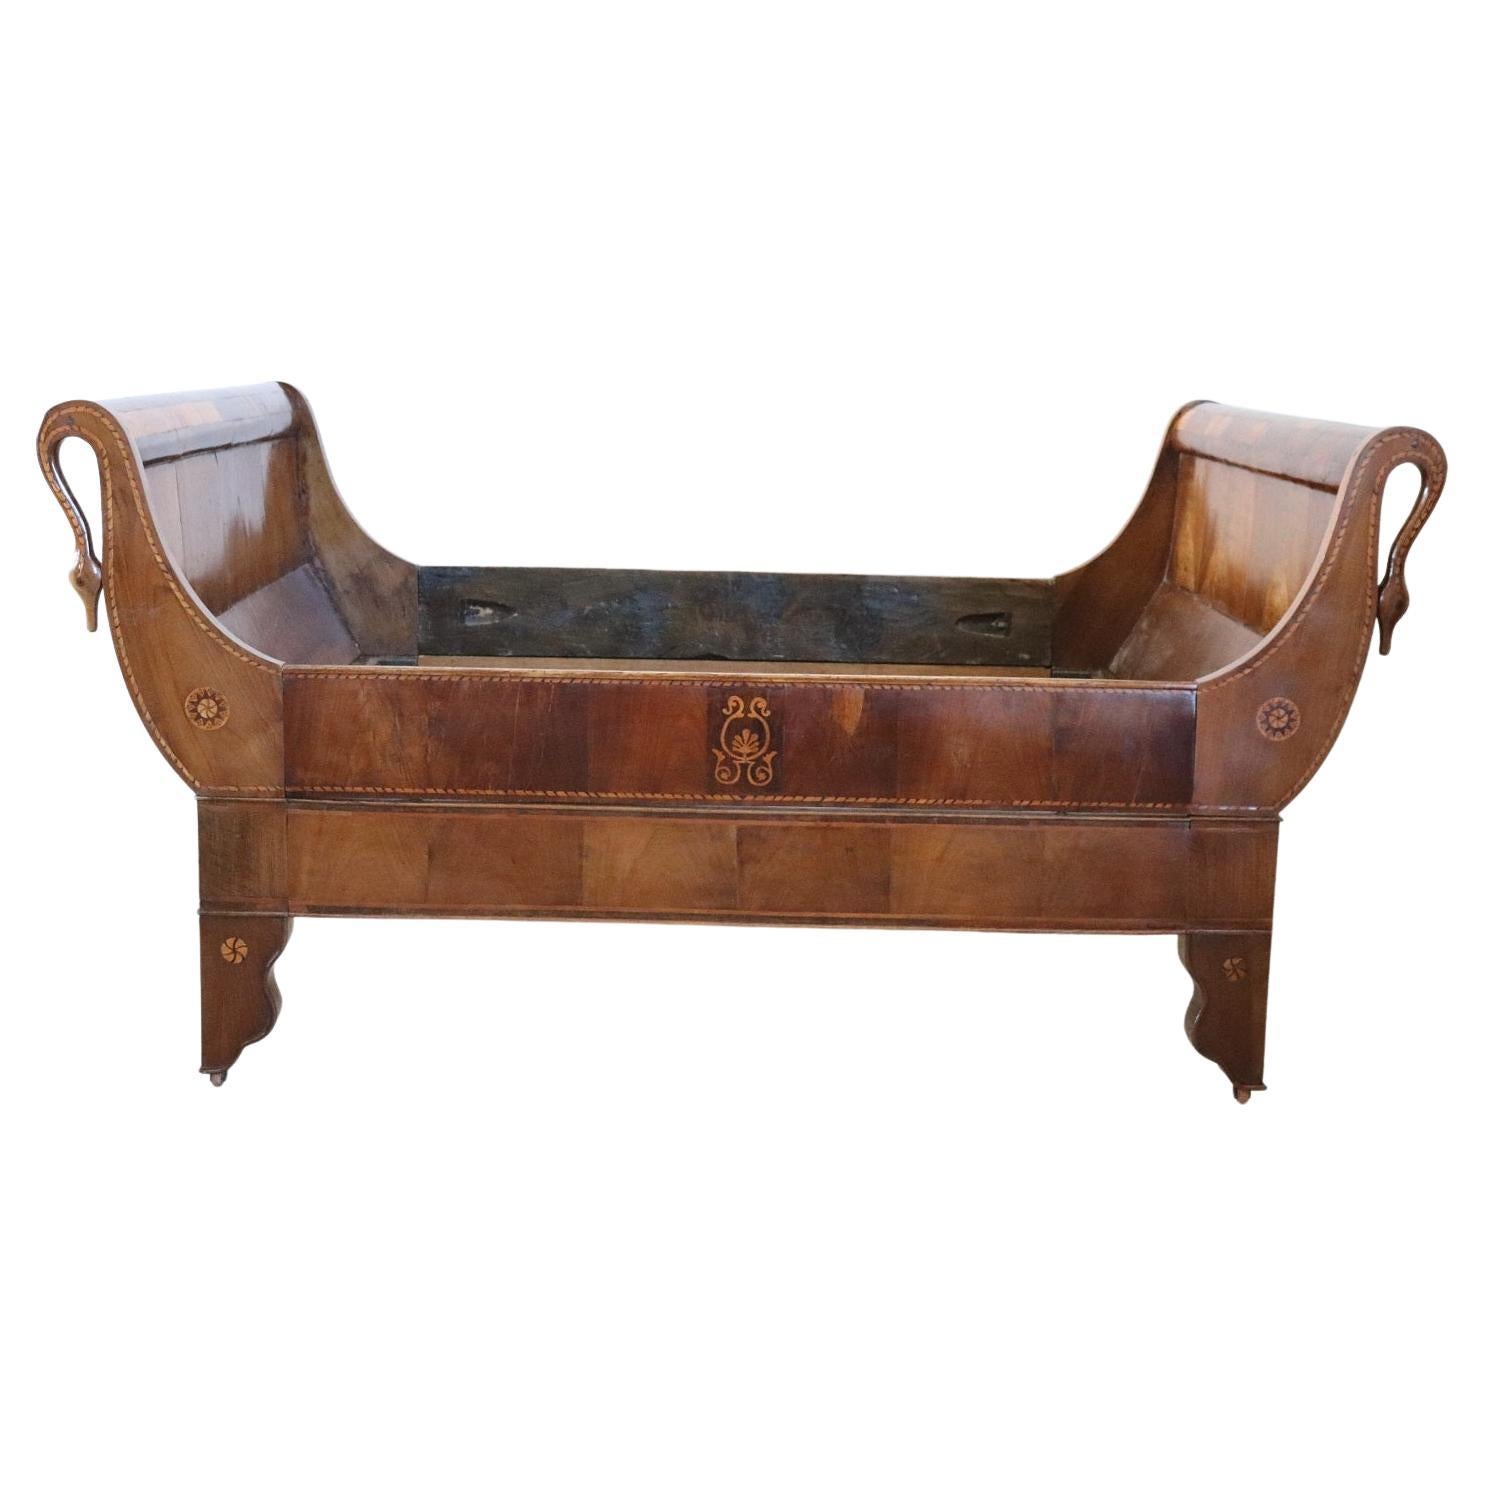 19th Century Italian Charles X Antique Walnut Inlaid Bed For Sale